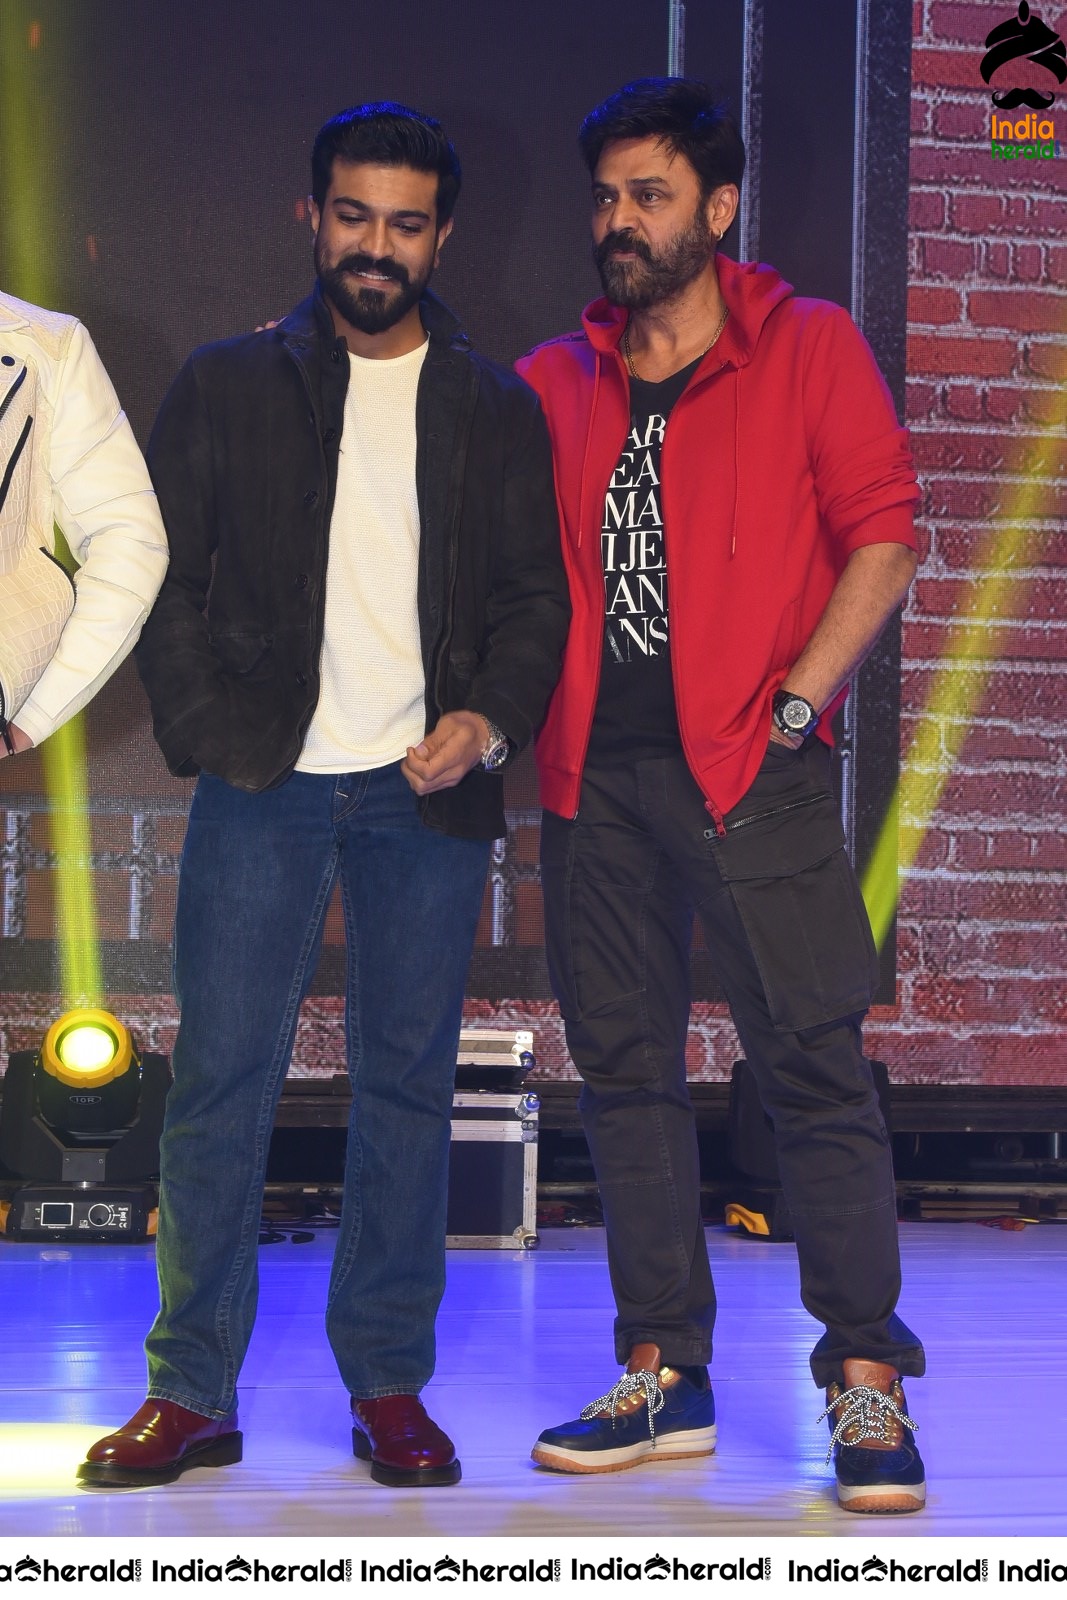 Actors Ram Charan and Venkatesh Seen Together On the Stage Set 2